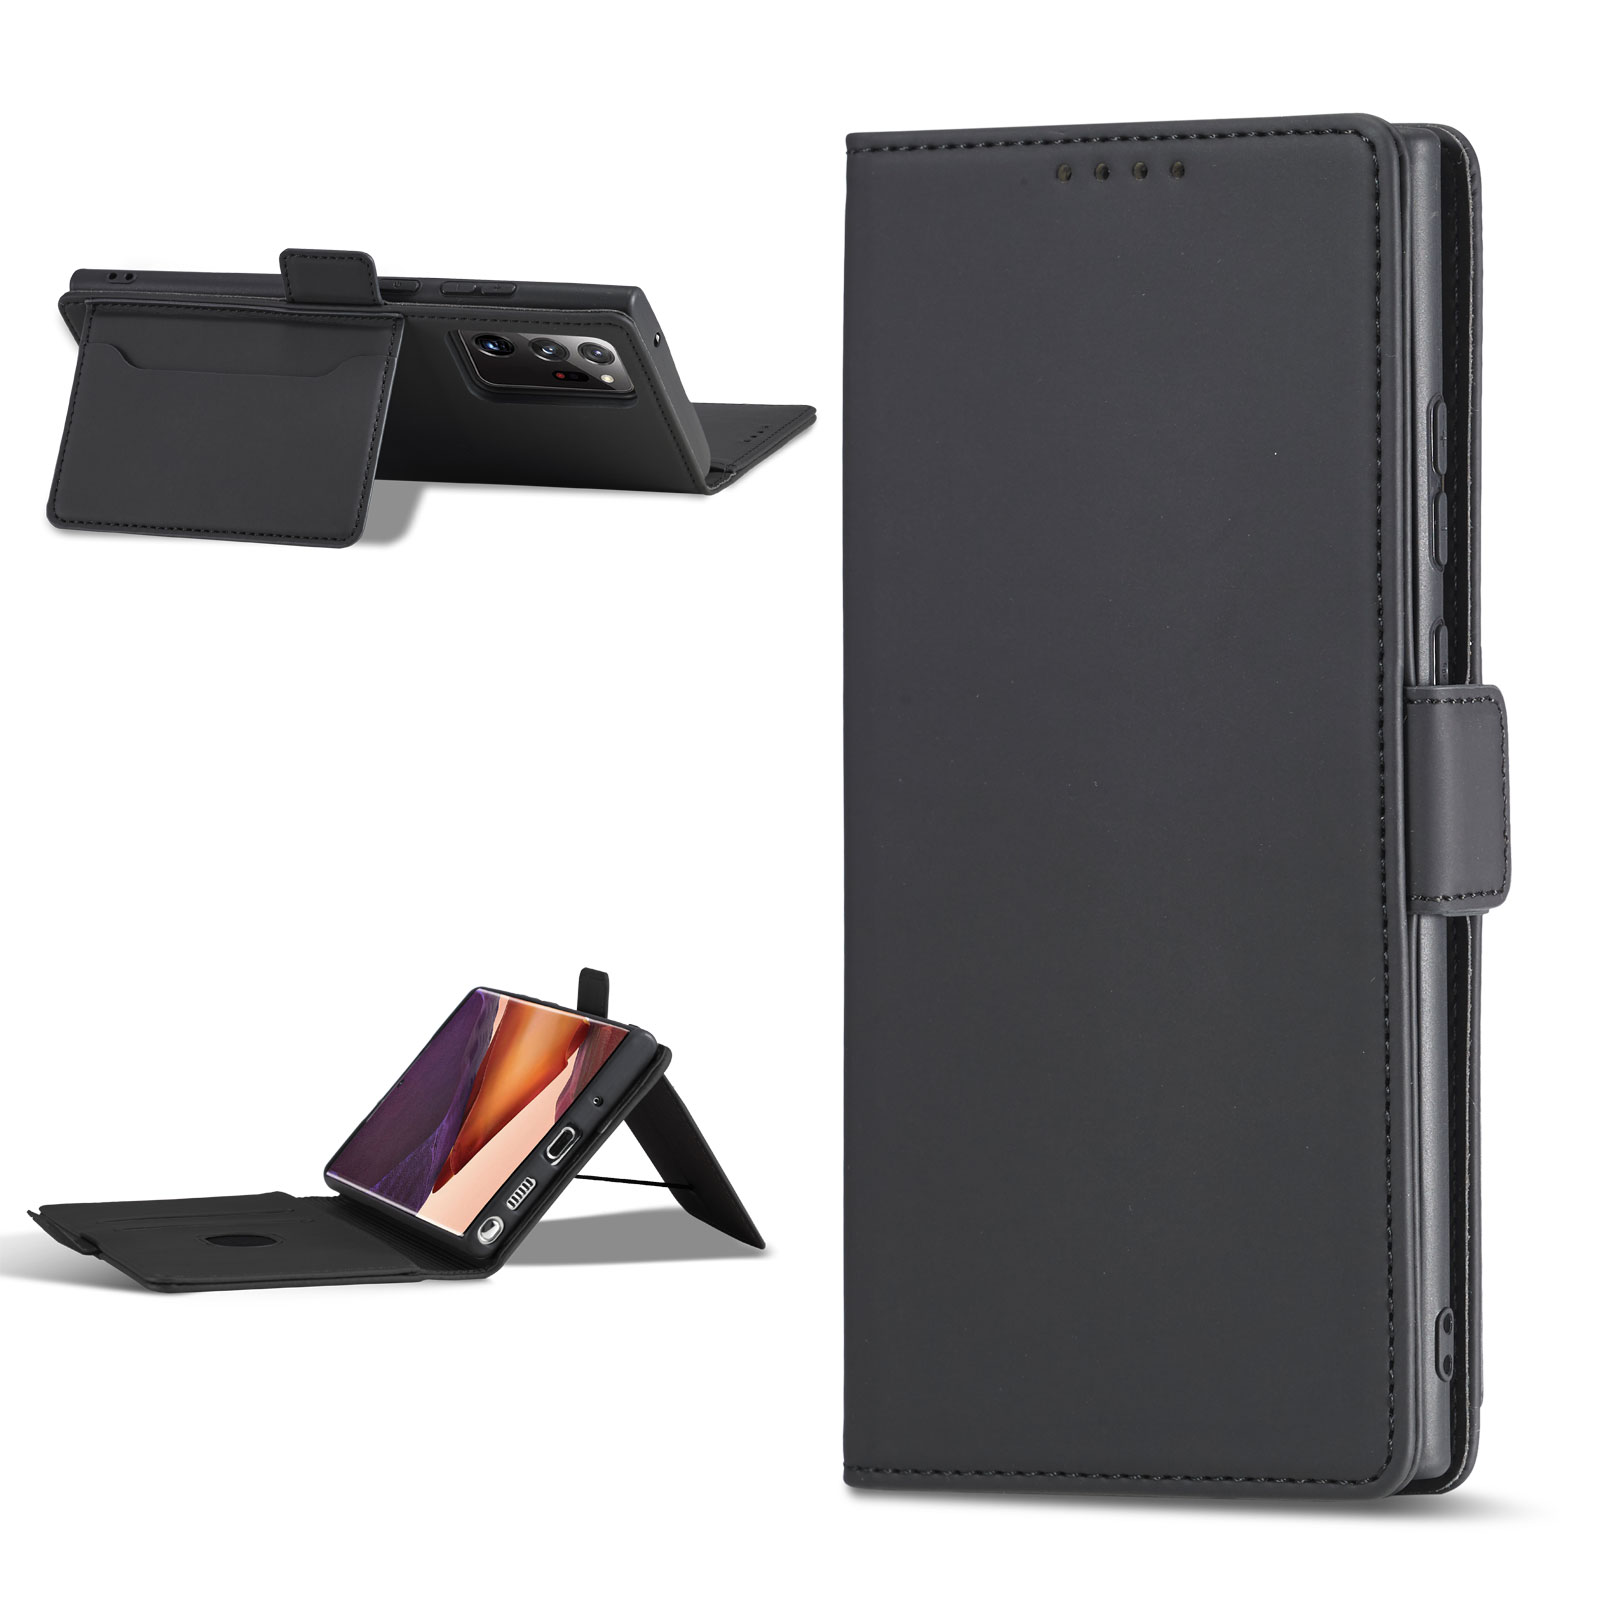 Bakeey-for-Samsung-Galaxy-Note-20-Case-Business-Flip-Magnetic-with-Multi-Card-Slots-Wallet-Shockproo-1763271-8